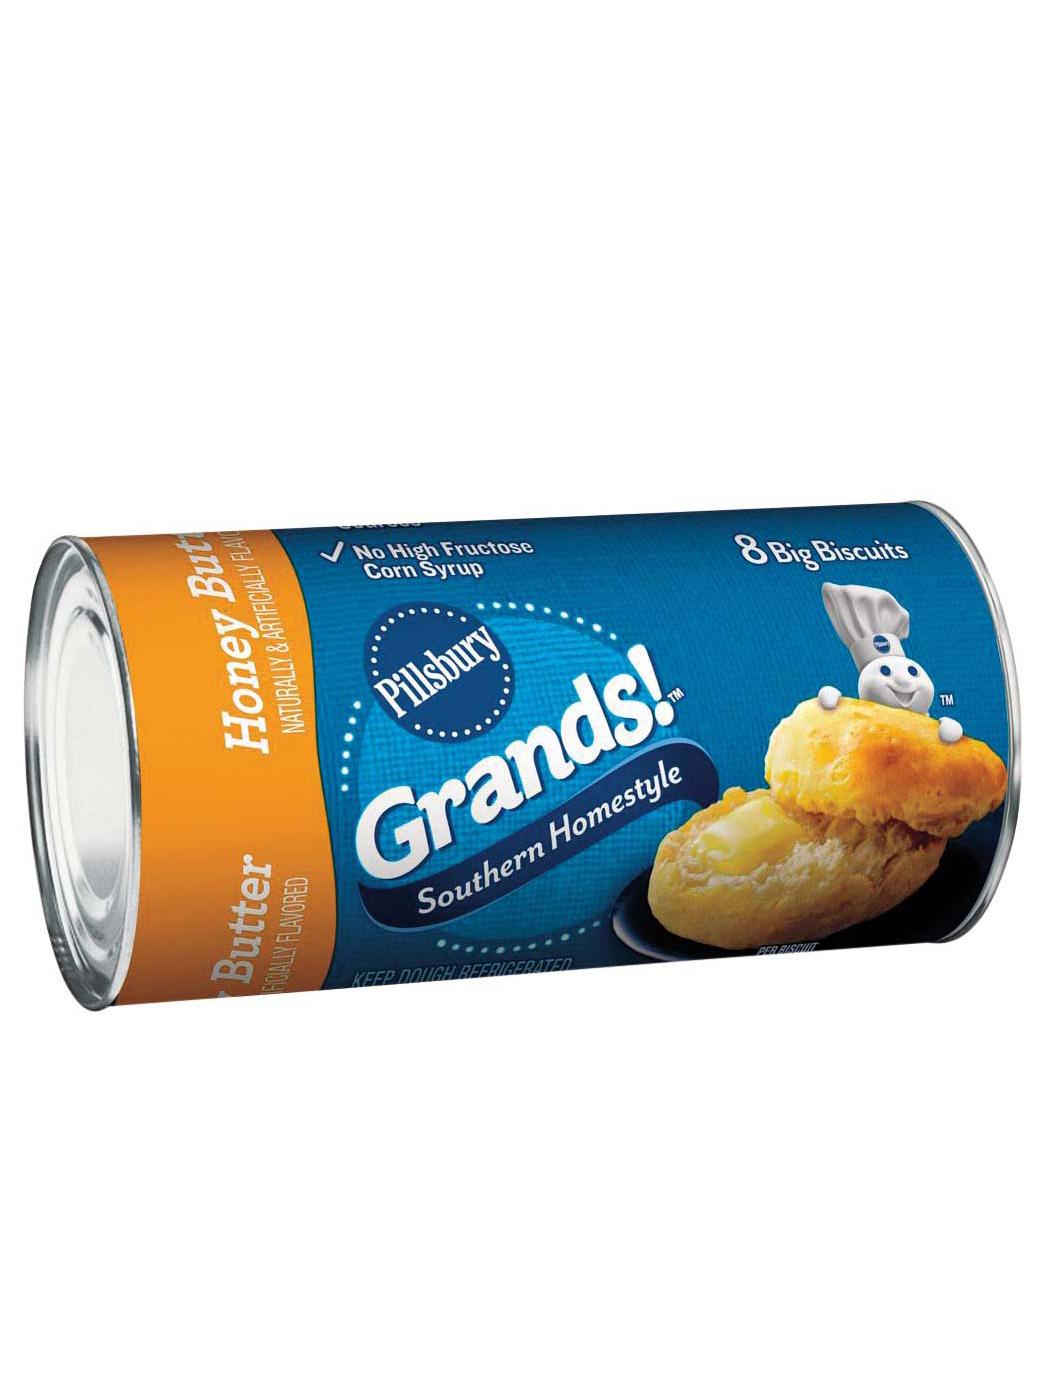 Pillsbury Grands! Southern Homestyle Honey Butter Biscuits; image 1 of 2